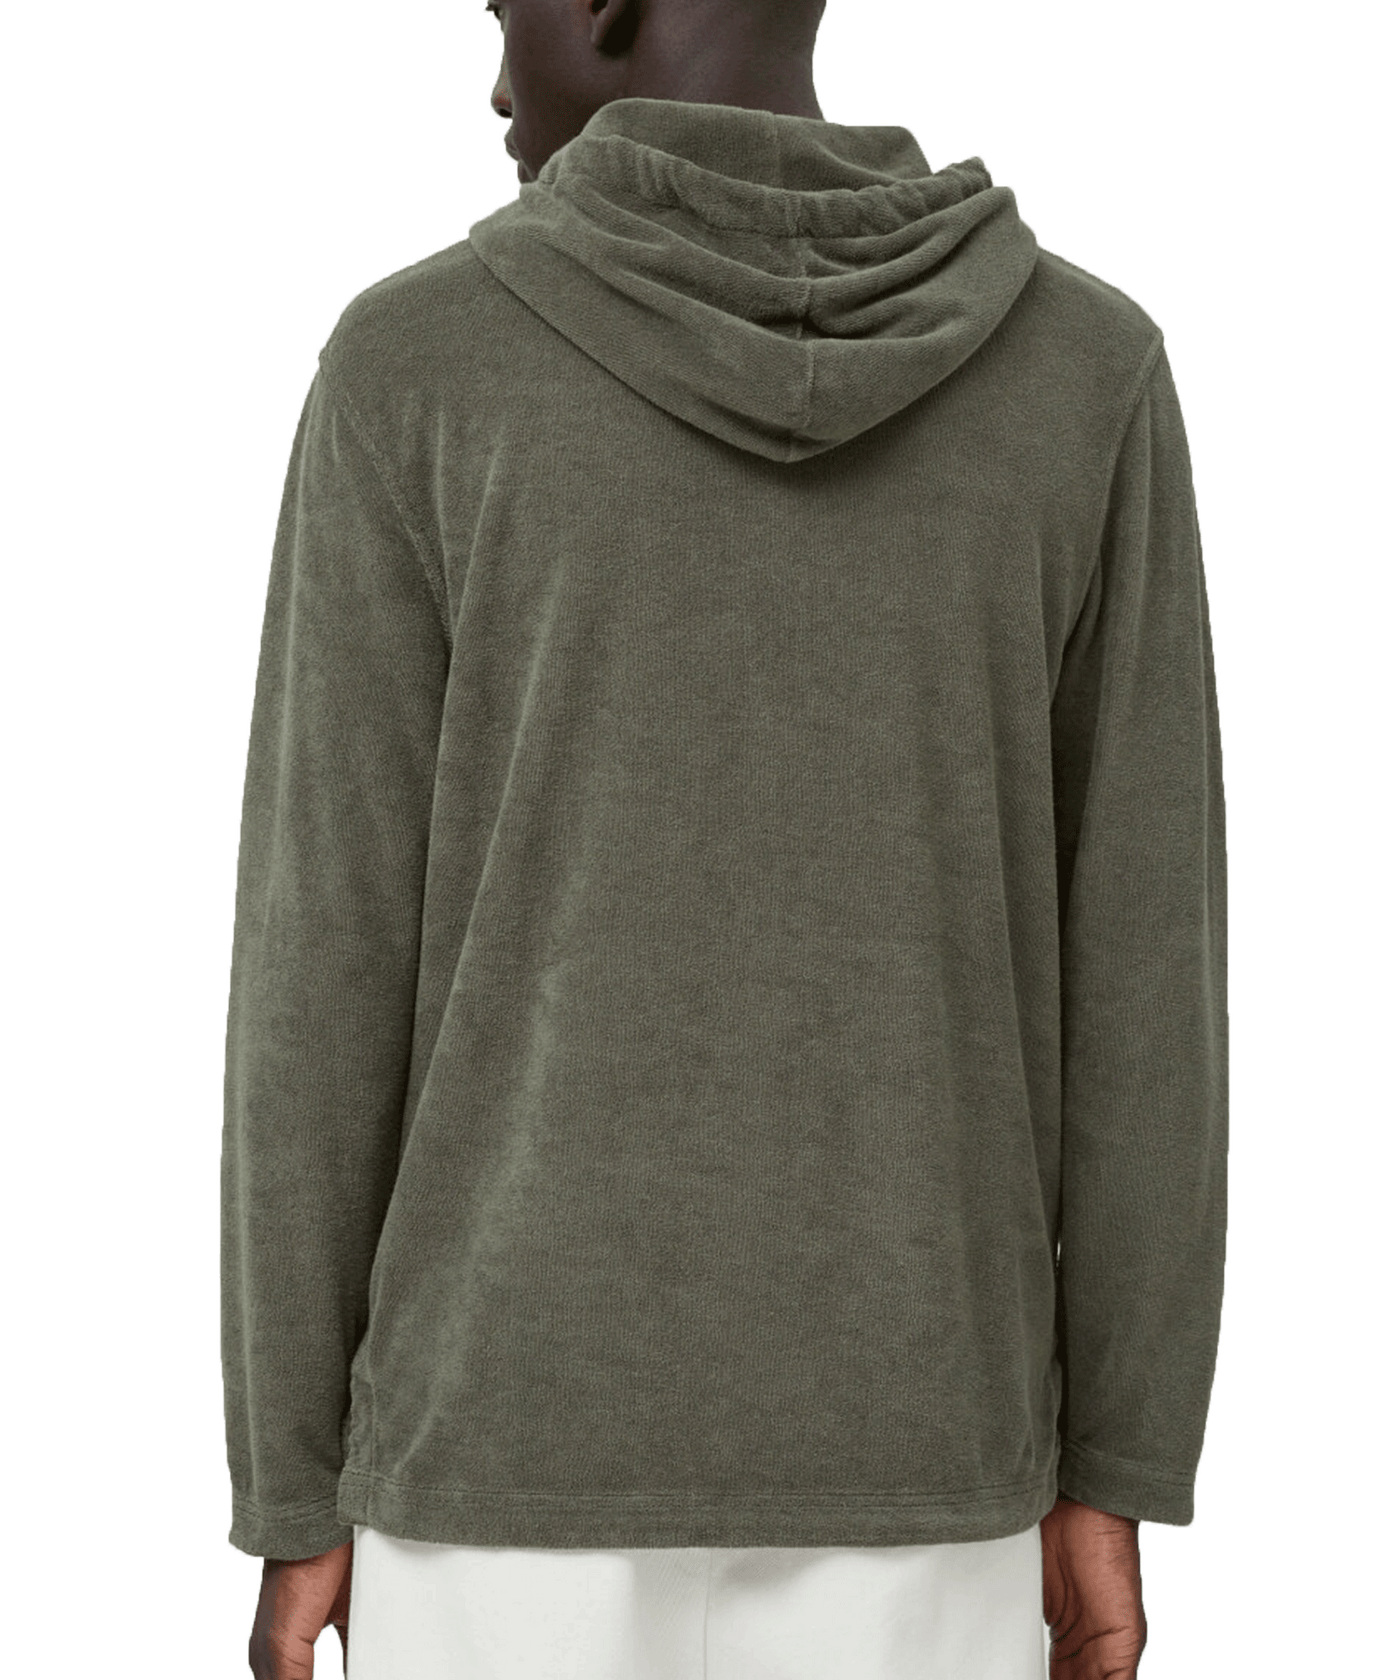 CLOSED - C85260 - Hooded Sweater - 690 Dried Basil